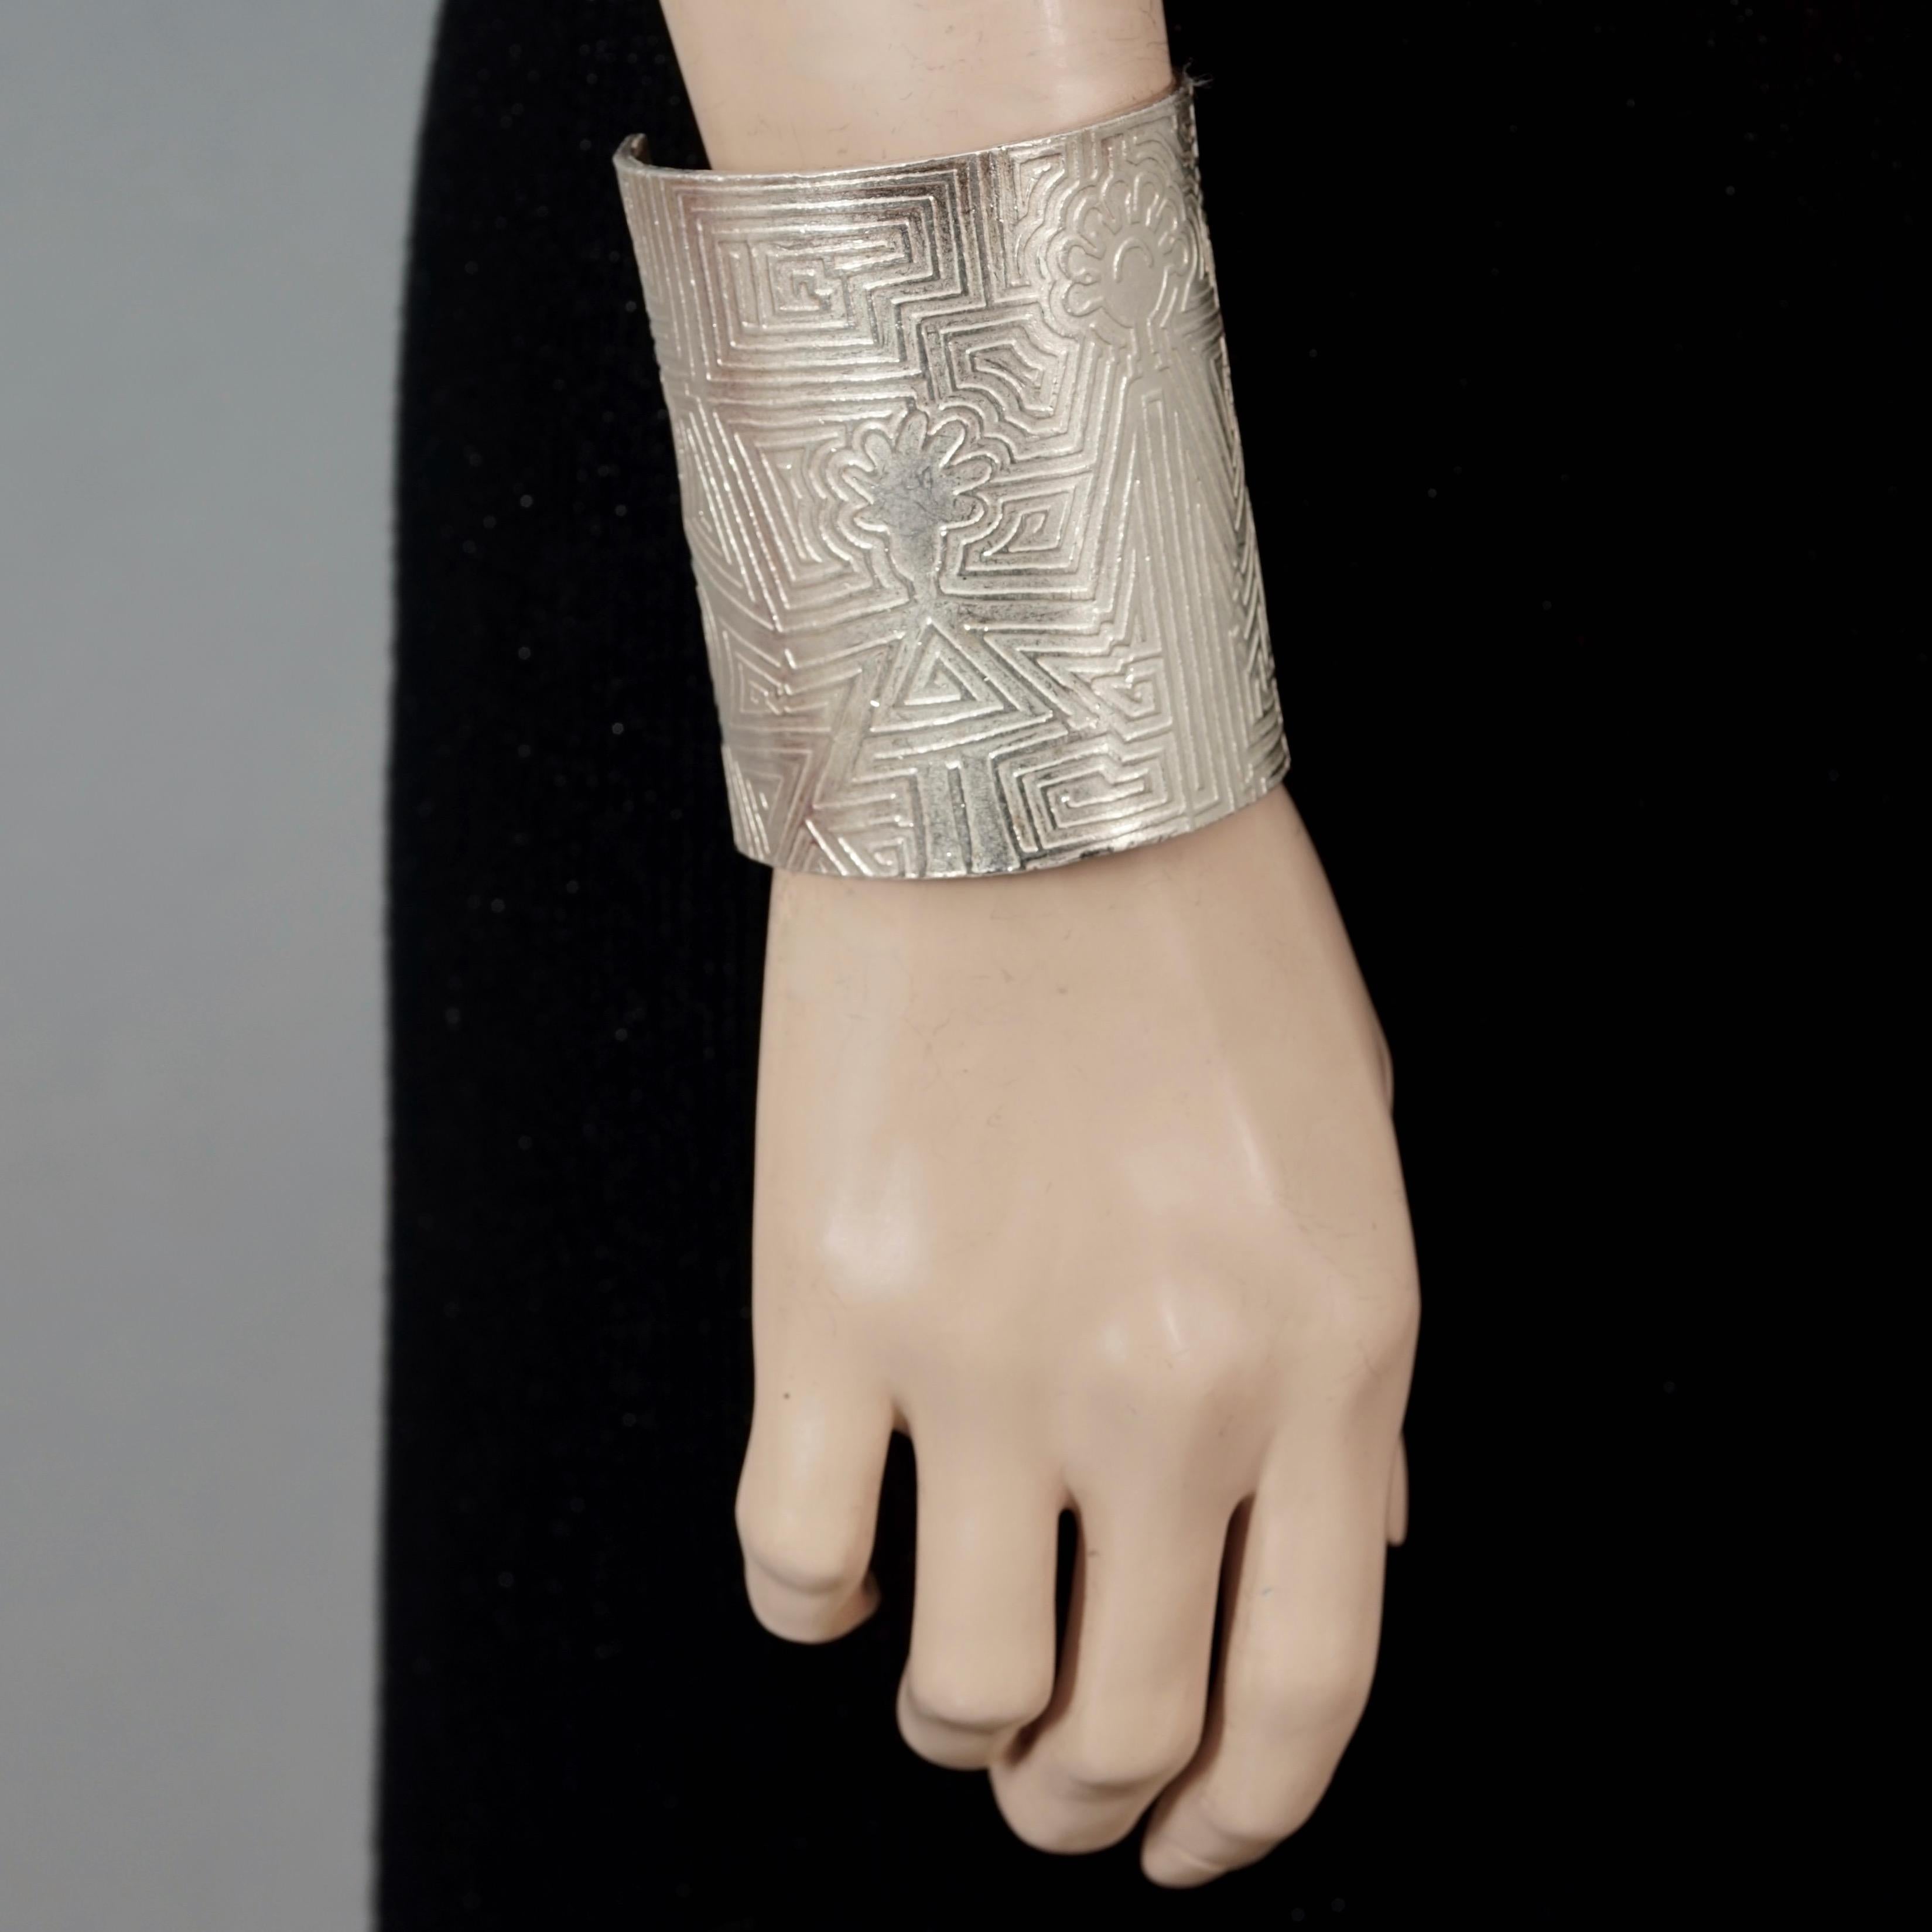 Vintage BICHE de BERE Figural Geometric Wide Silver Cuff Bracelet

Measurements:
Height: 3.46 inches (8.8 cm)
Length: 7.08 inches (18 cm) opening included

Features:
- 100% authentic BICHE DE BERE.
- Wide embossed figural geometric patterned cuff